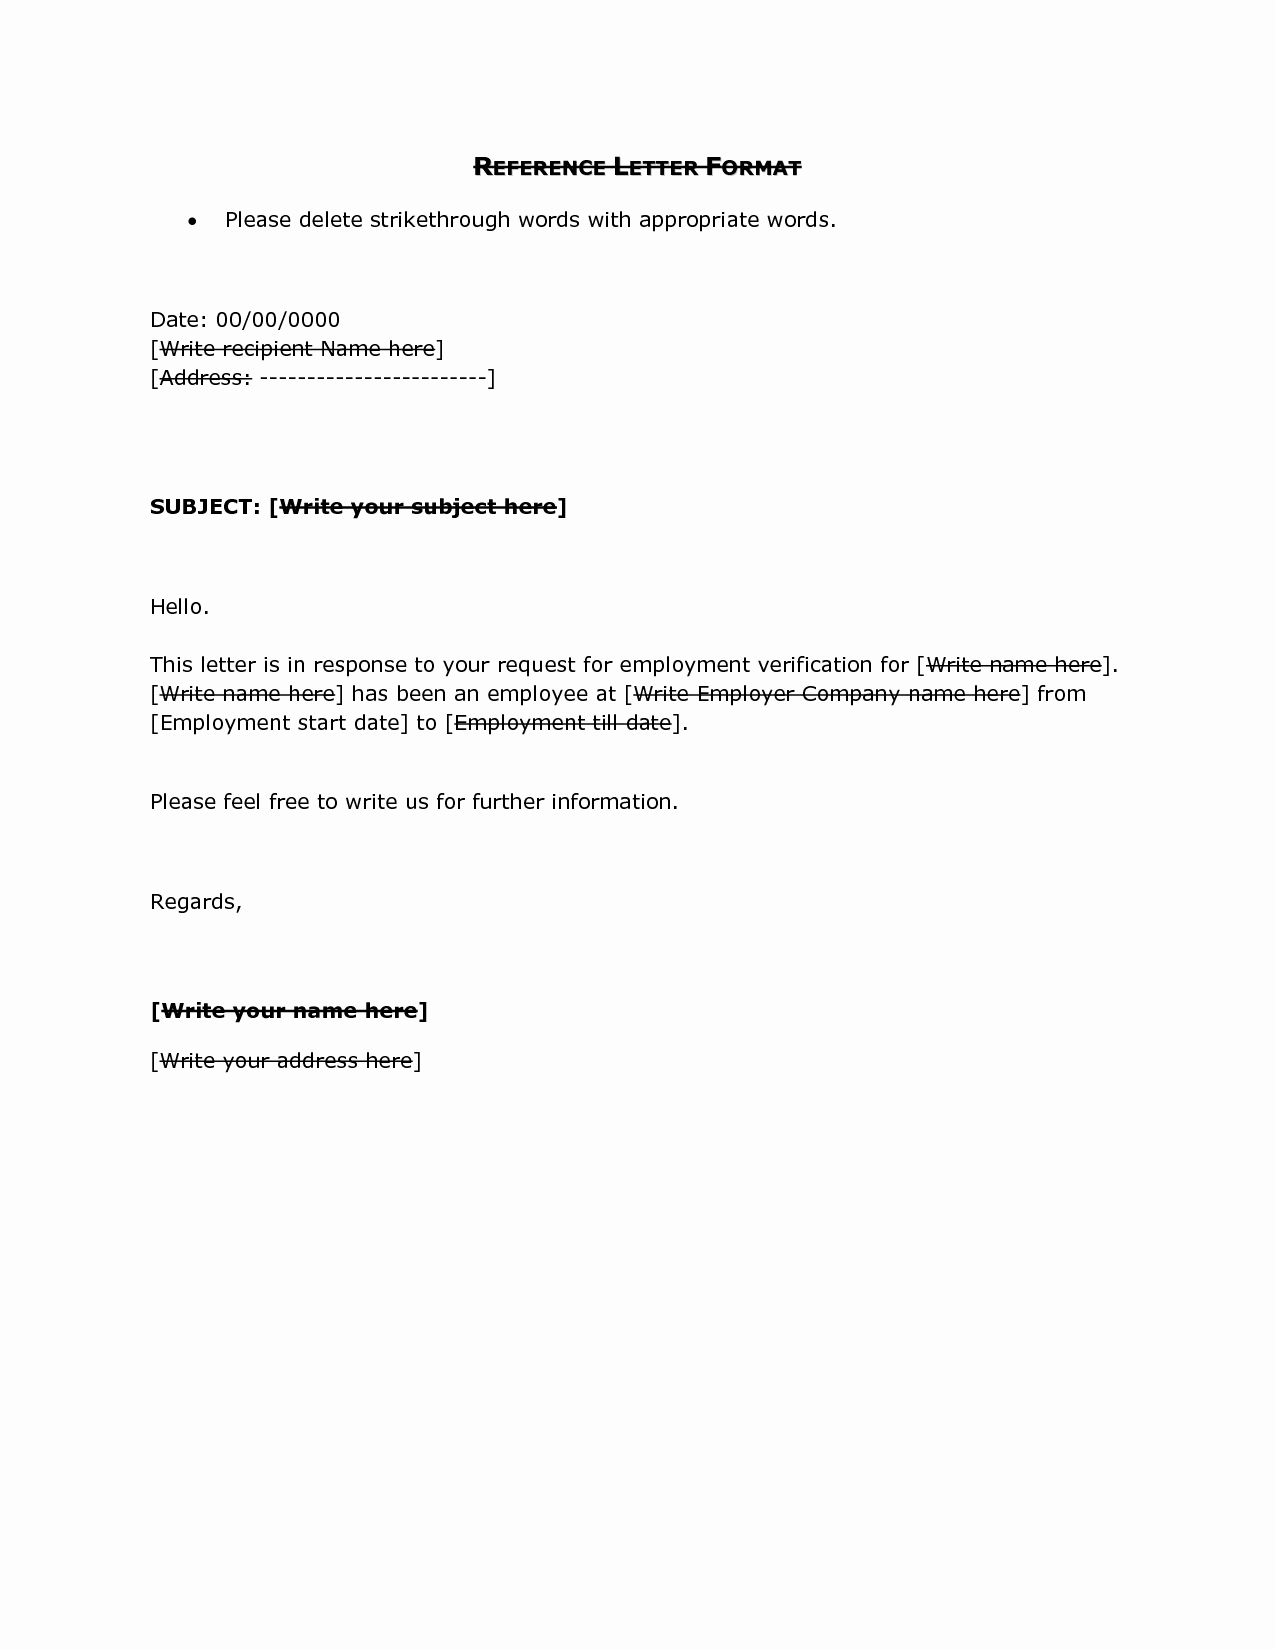 Free Business Letter Template Beautiful Reference Letter format Doc formatreference Letters